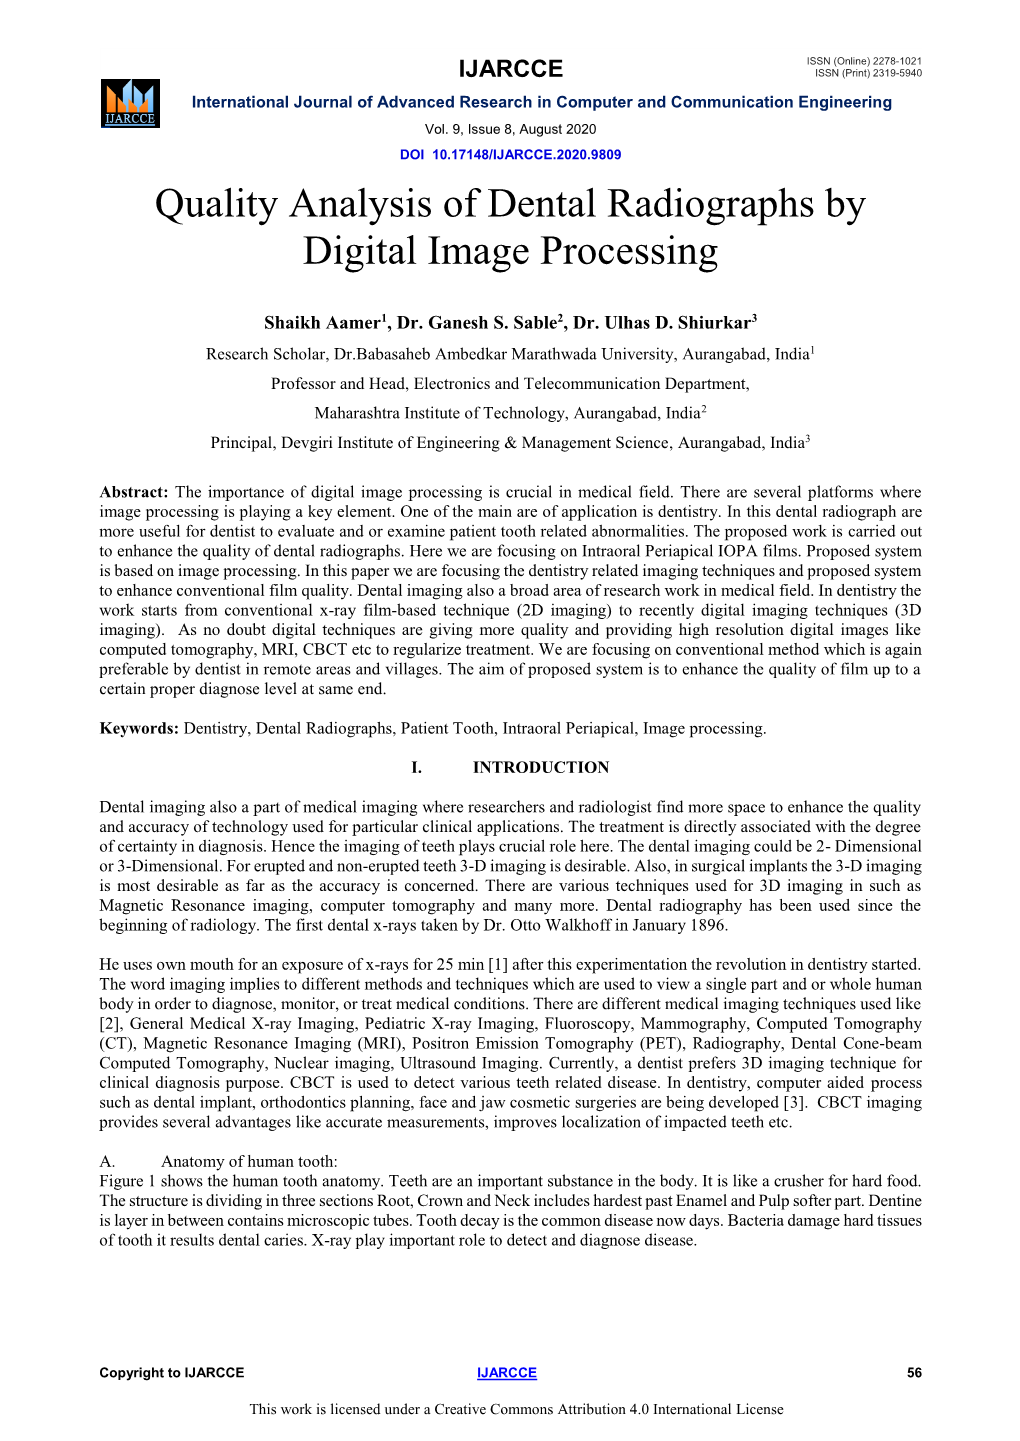 Quality Analysis of Dental Radiographs by Digital Image Processing